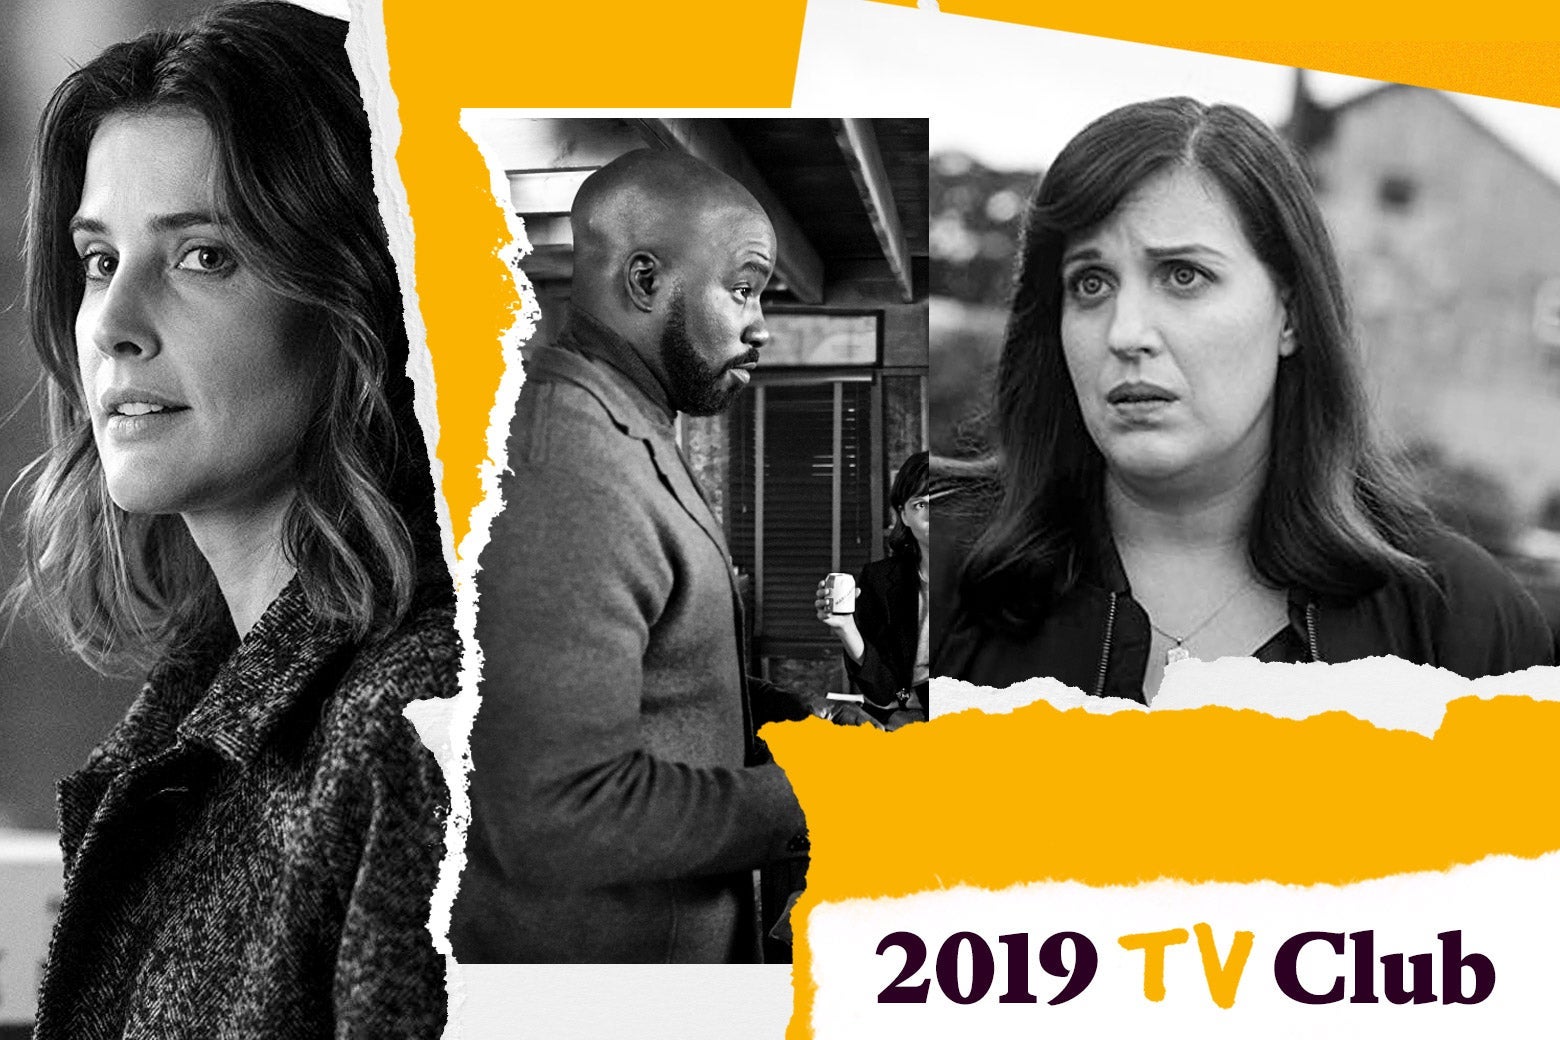 Cobie Smulders, Mike Colter, and Allison Tolman with text that says "2019 TV Club."